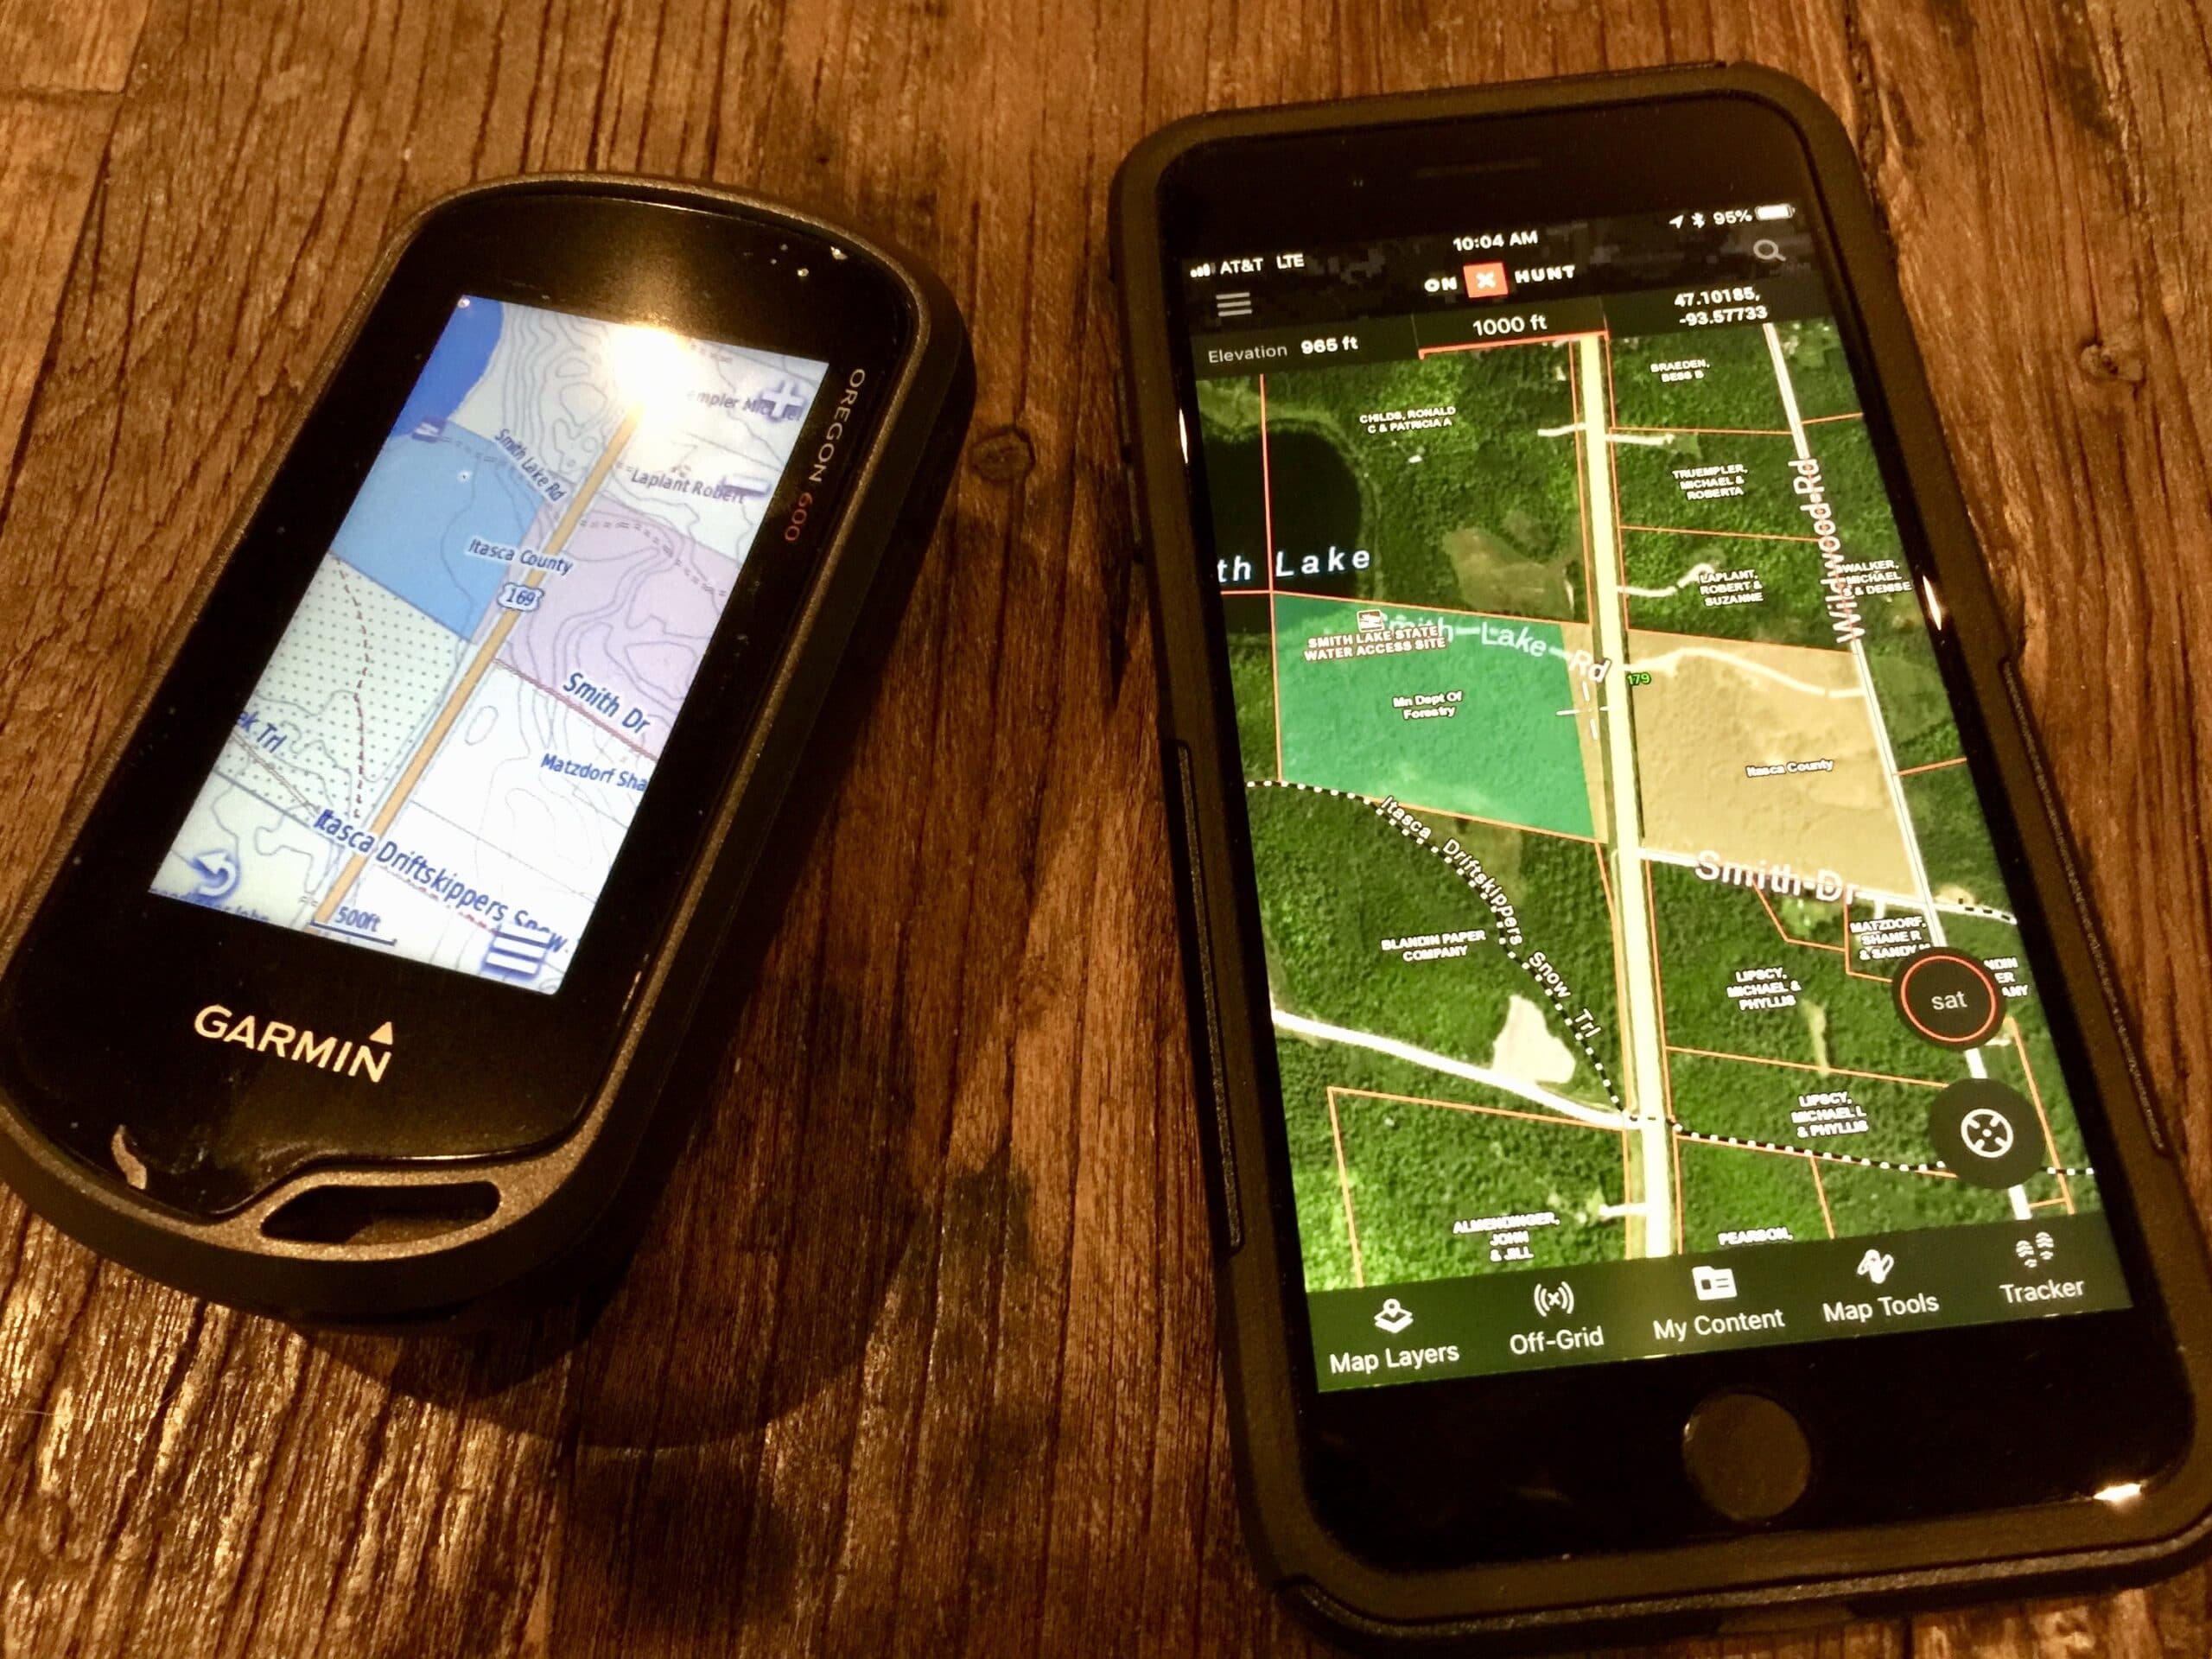 Accord Manchuriet restaurant GPS vs Smartphone for Backcountry Navigation - HuntTested